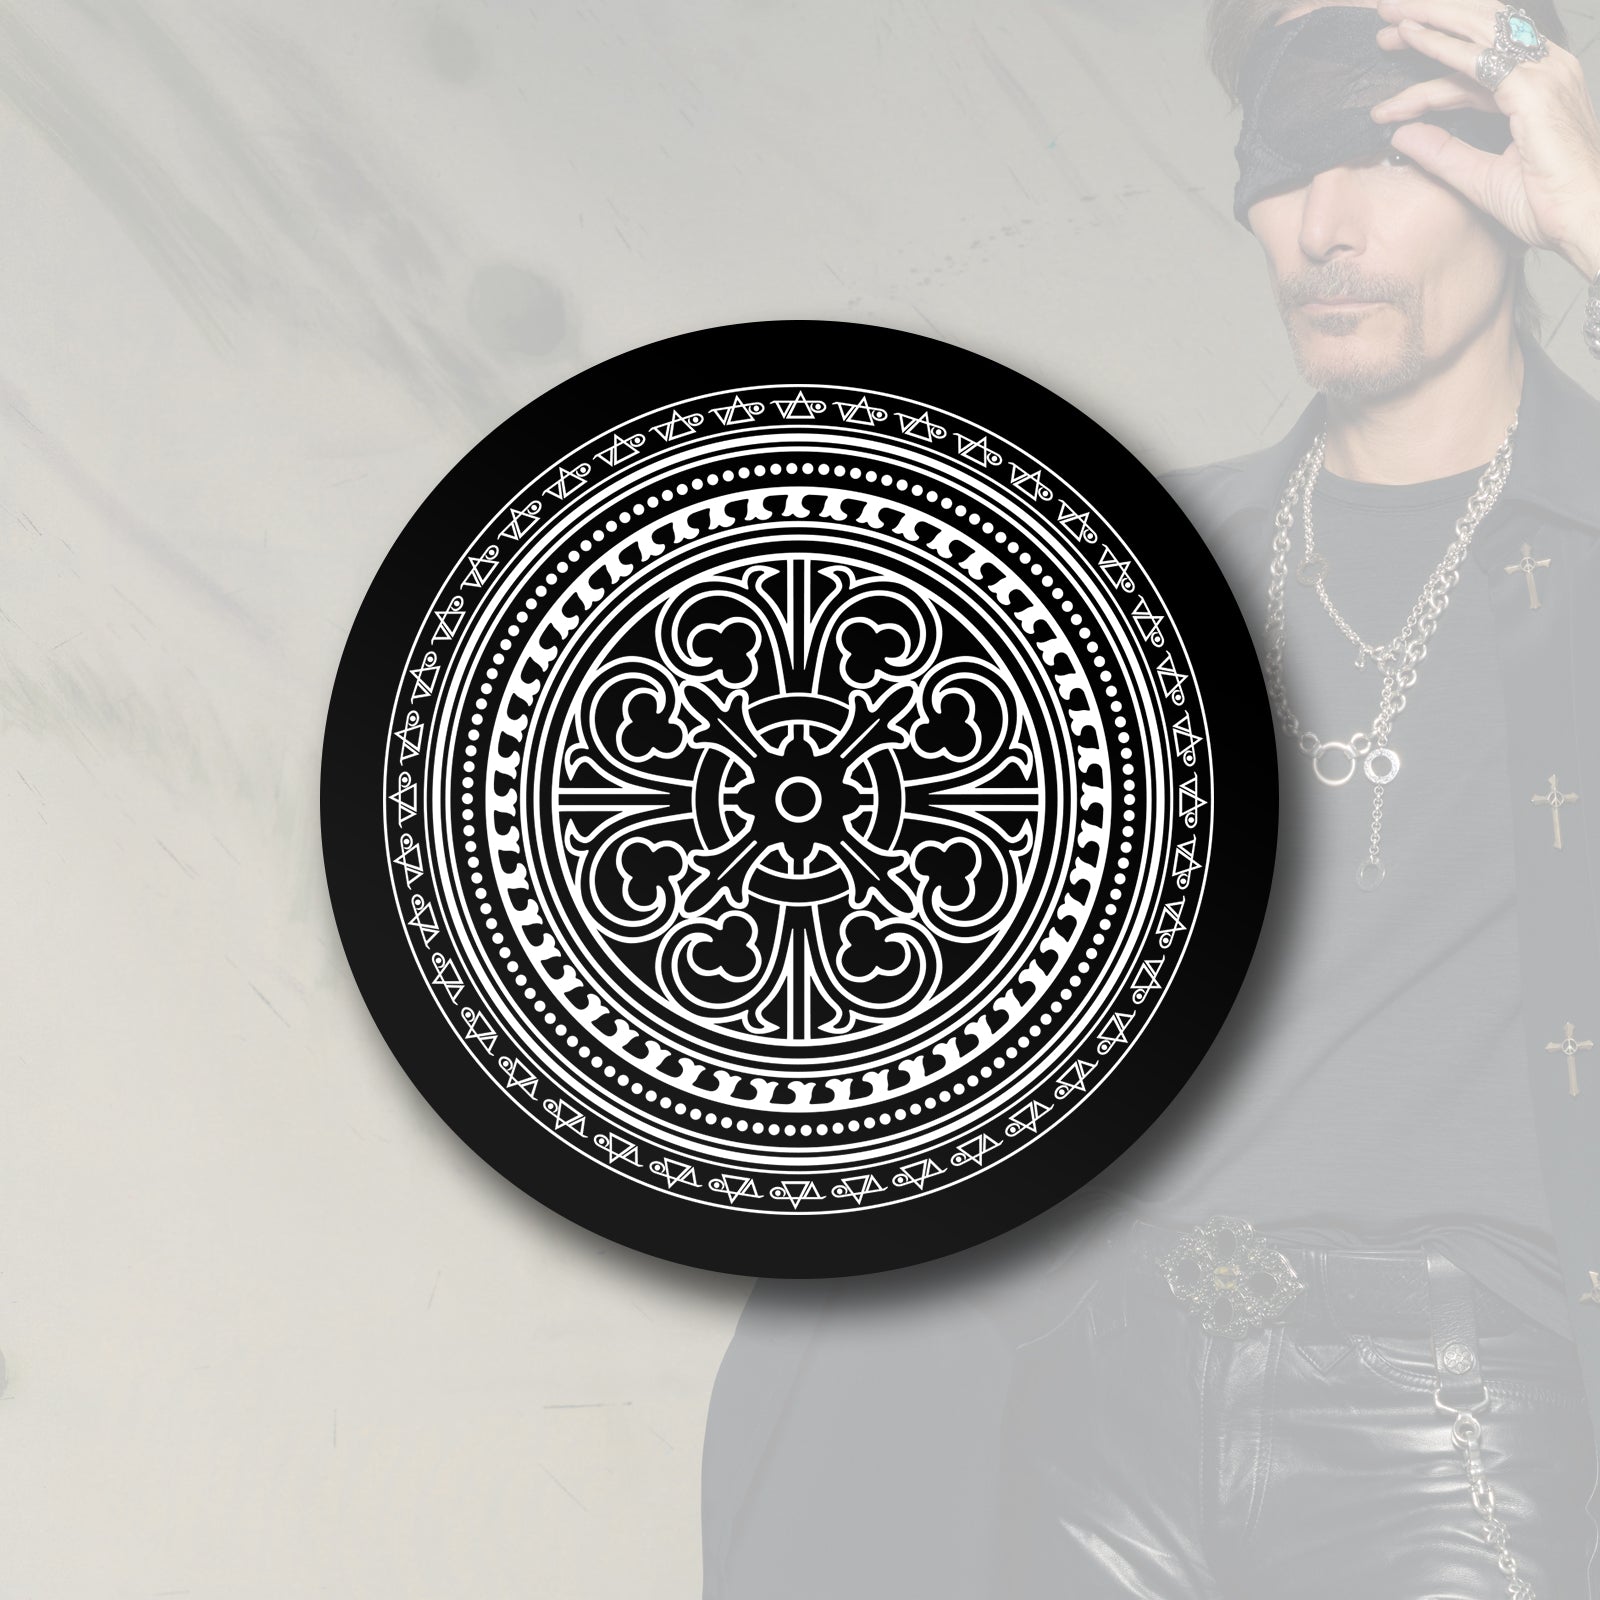 Image of a black and white circular sticker against a faded white transparent background with an image of steve vai in the corner lifting a bandana up that is over his eye. the sticker is black and has white print on it. it is an abstract circular image that has a pattern that makes it look like it moves when you look at it.